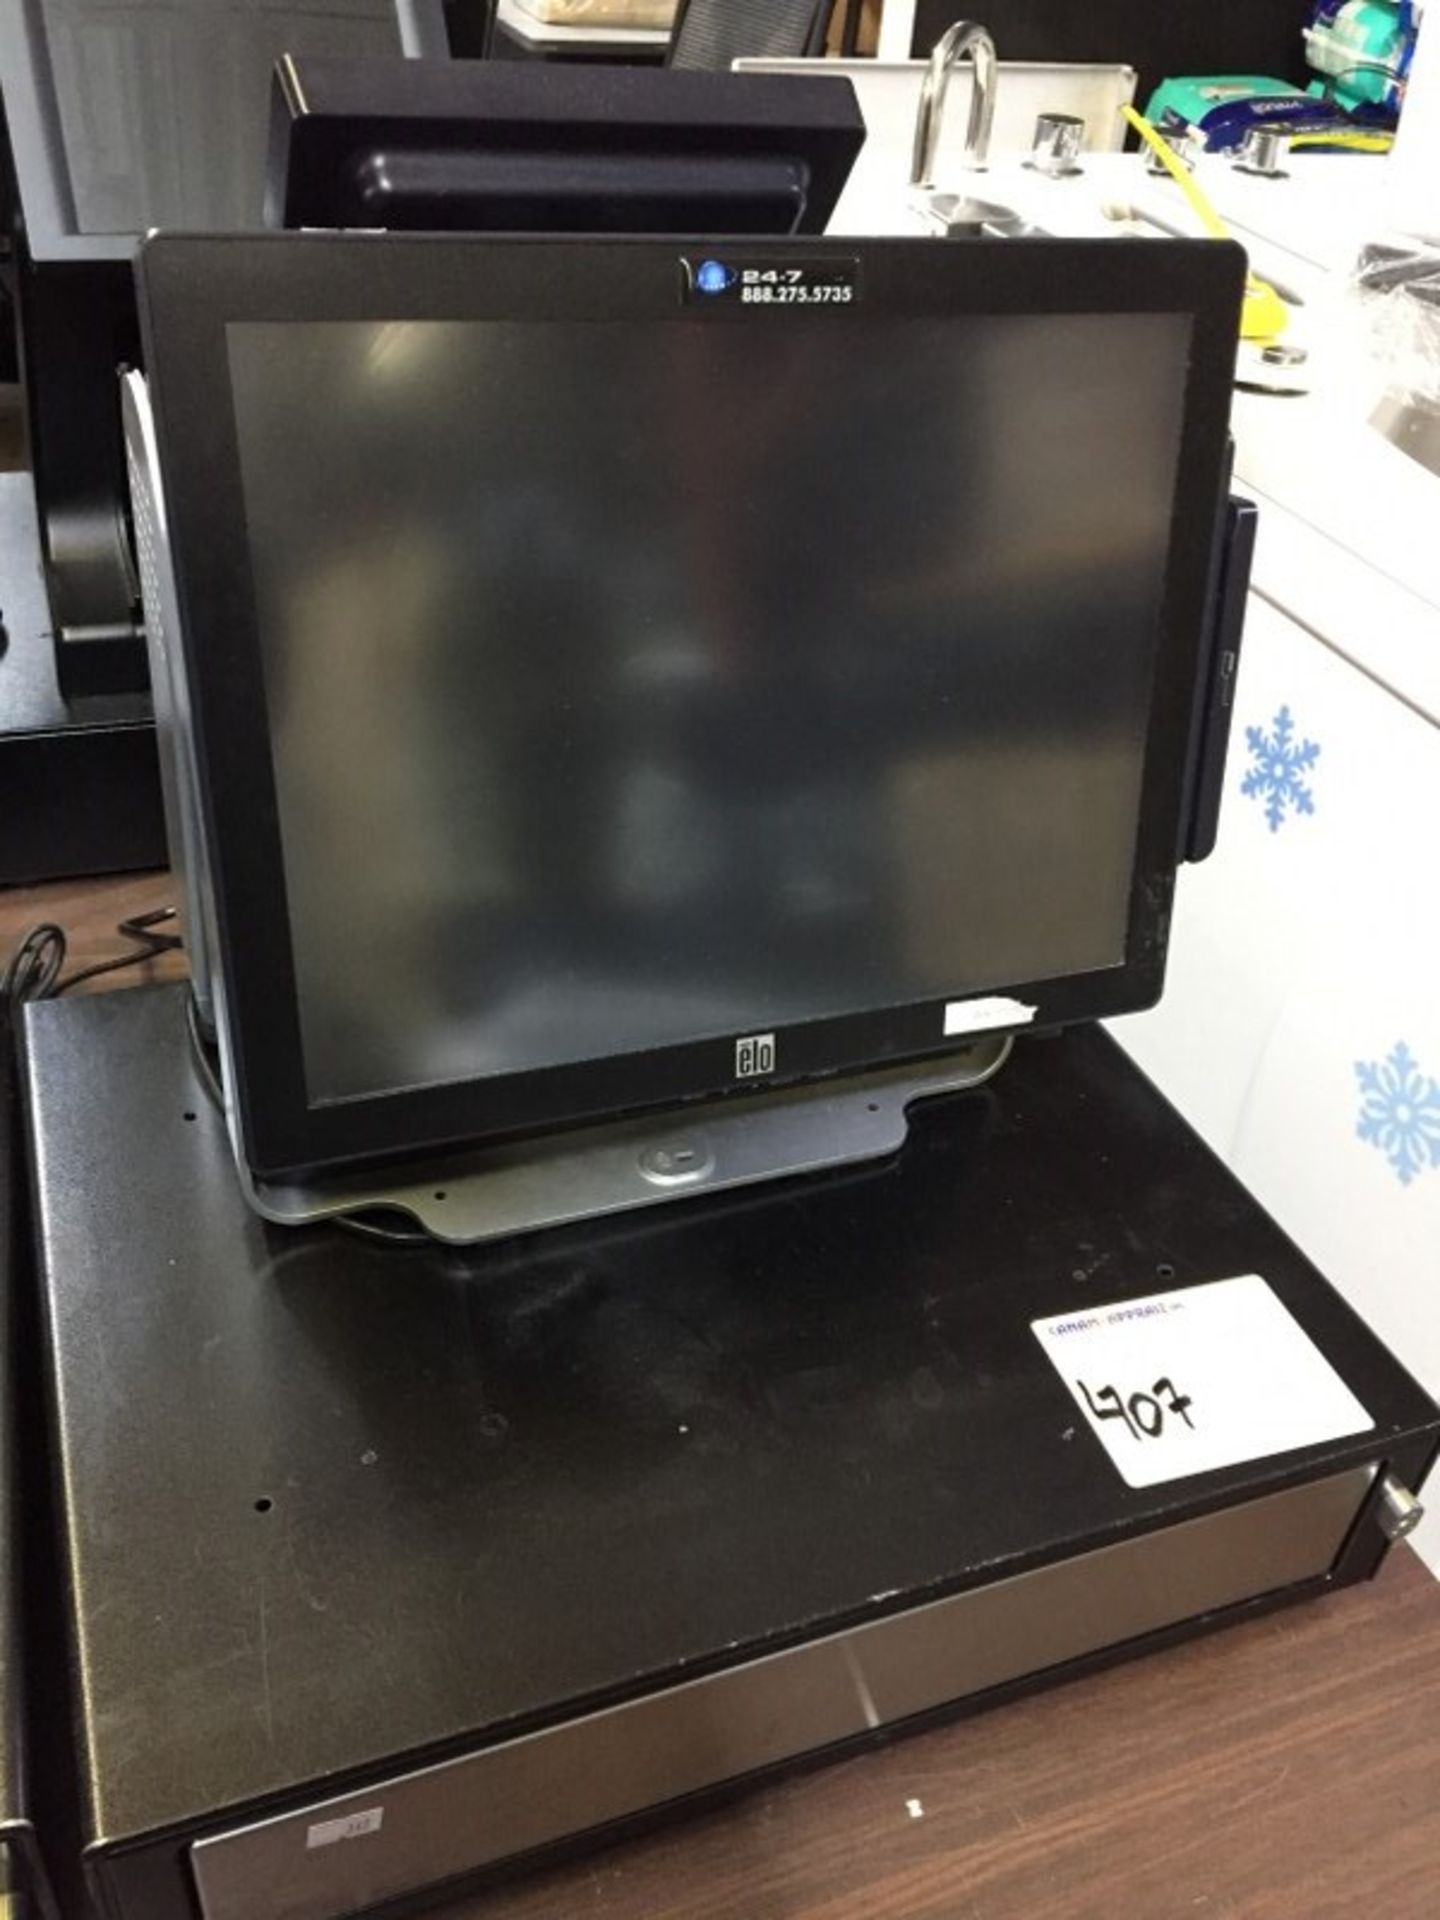 ELO TOUCH SYSTEMS - 19 INCH ALL-IN-ONE TOUCH SCREEN POS COMPUTER - MODEL# E566232 W/CASH TILL